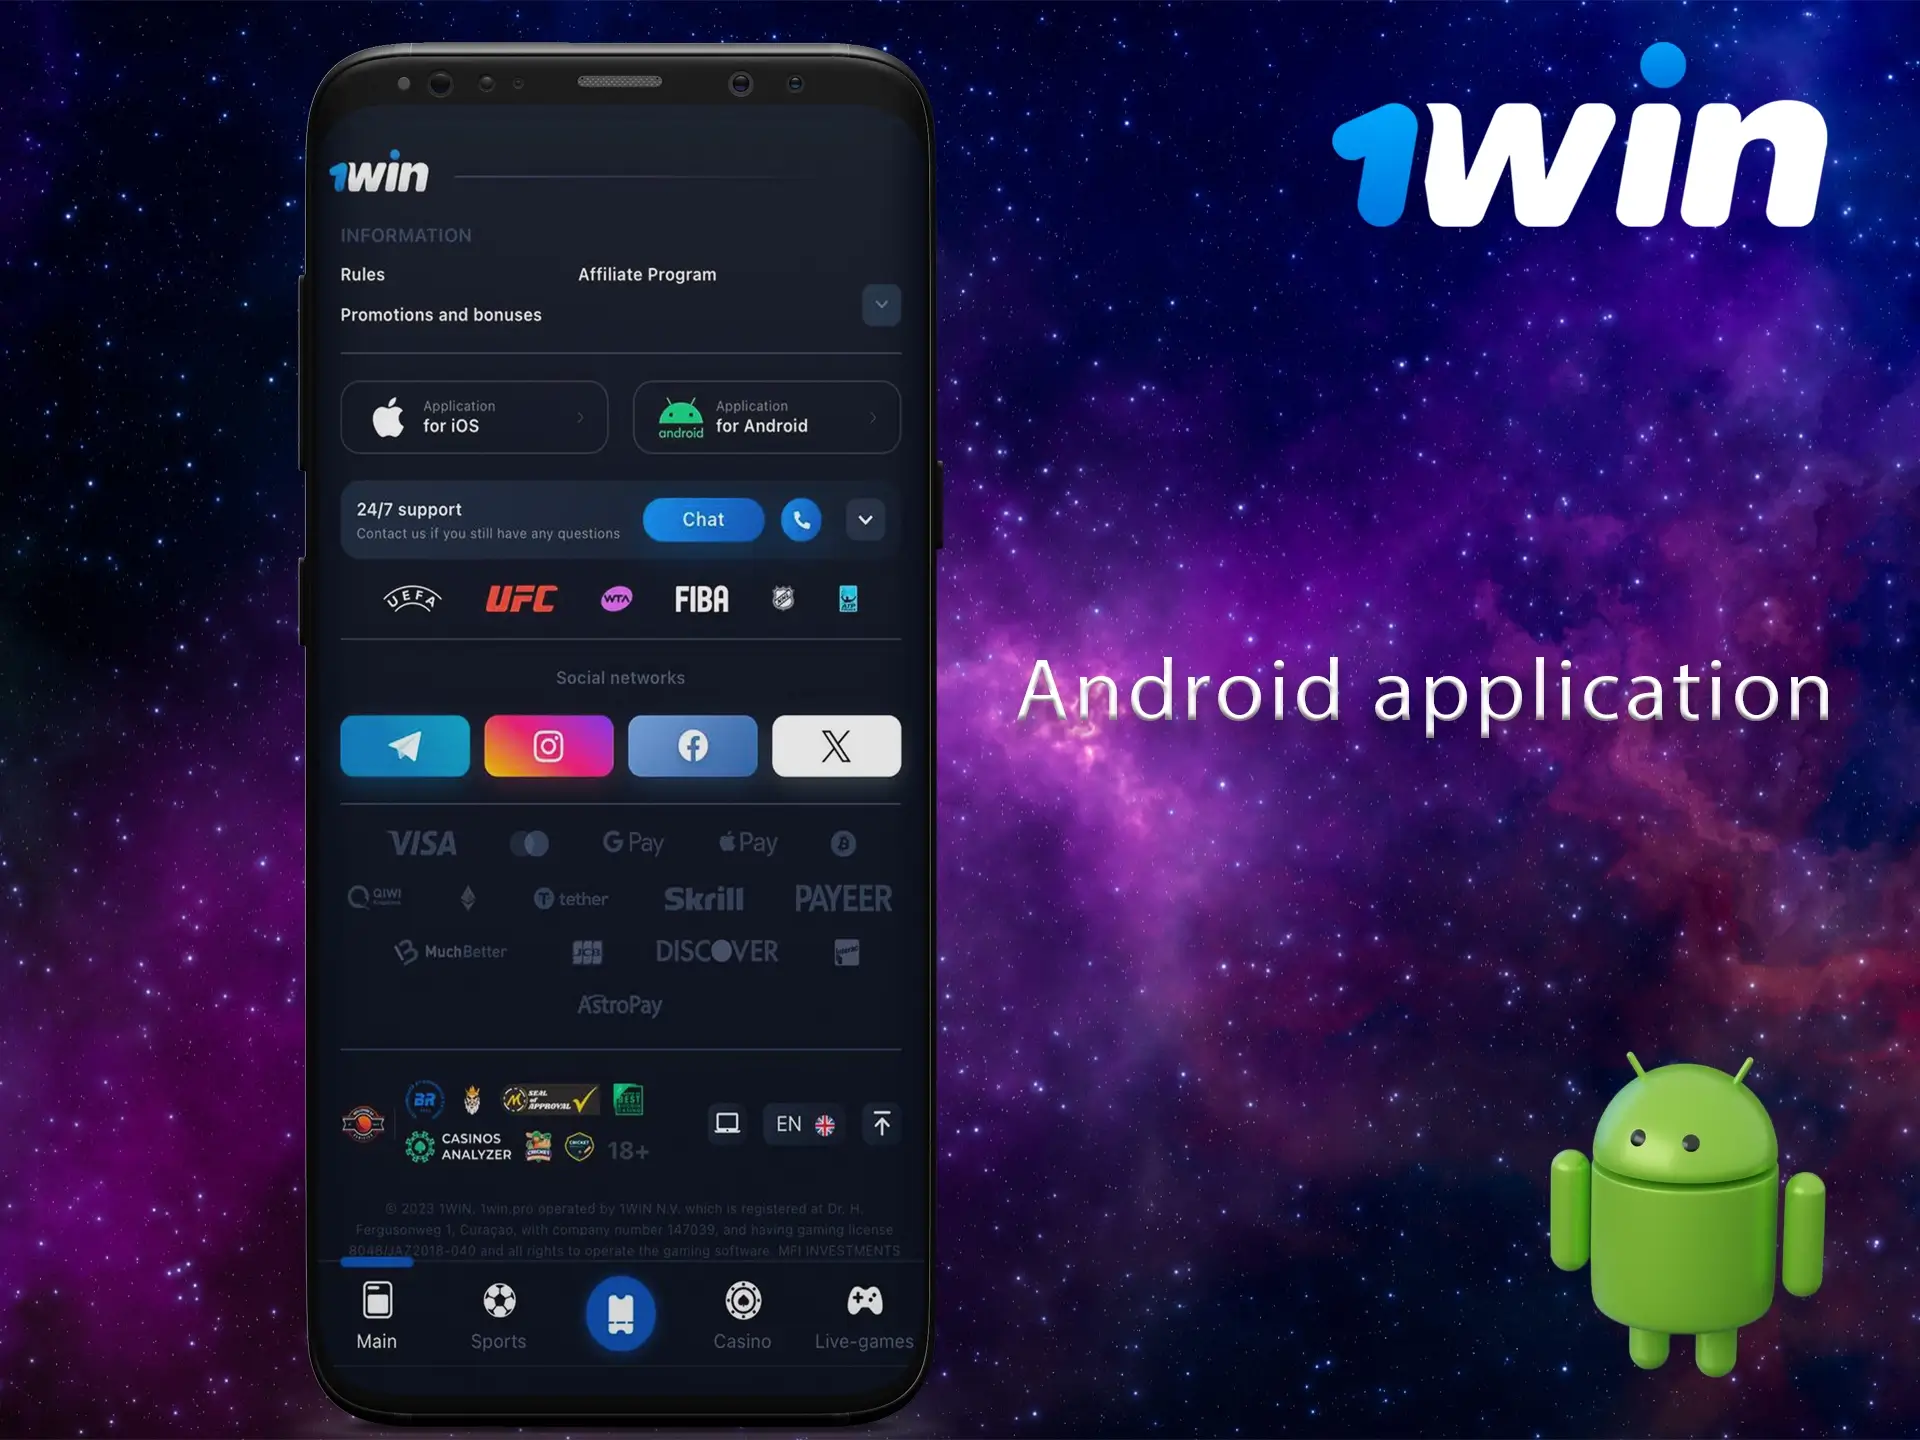 The 1Win app is already available for download and installation on android devices.